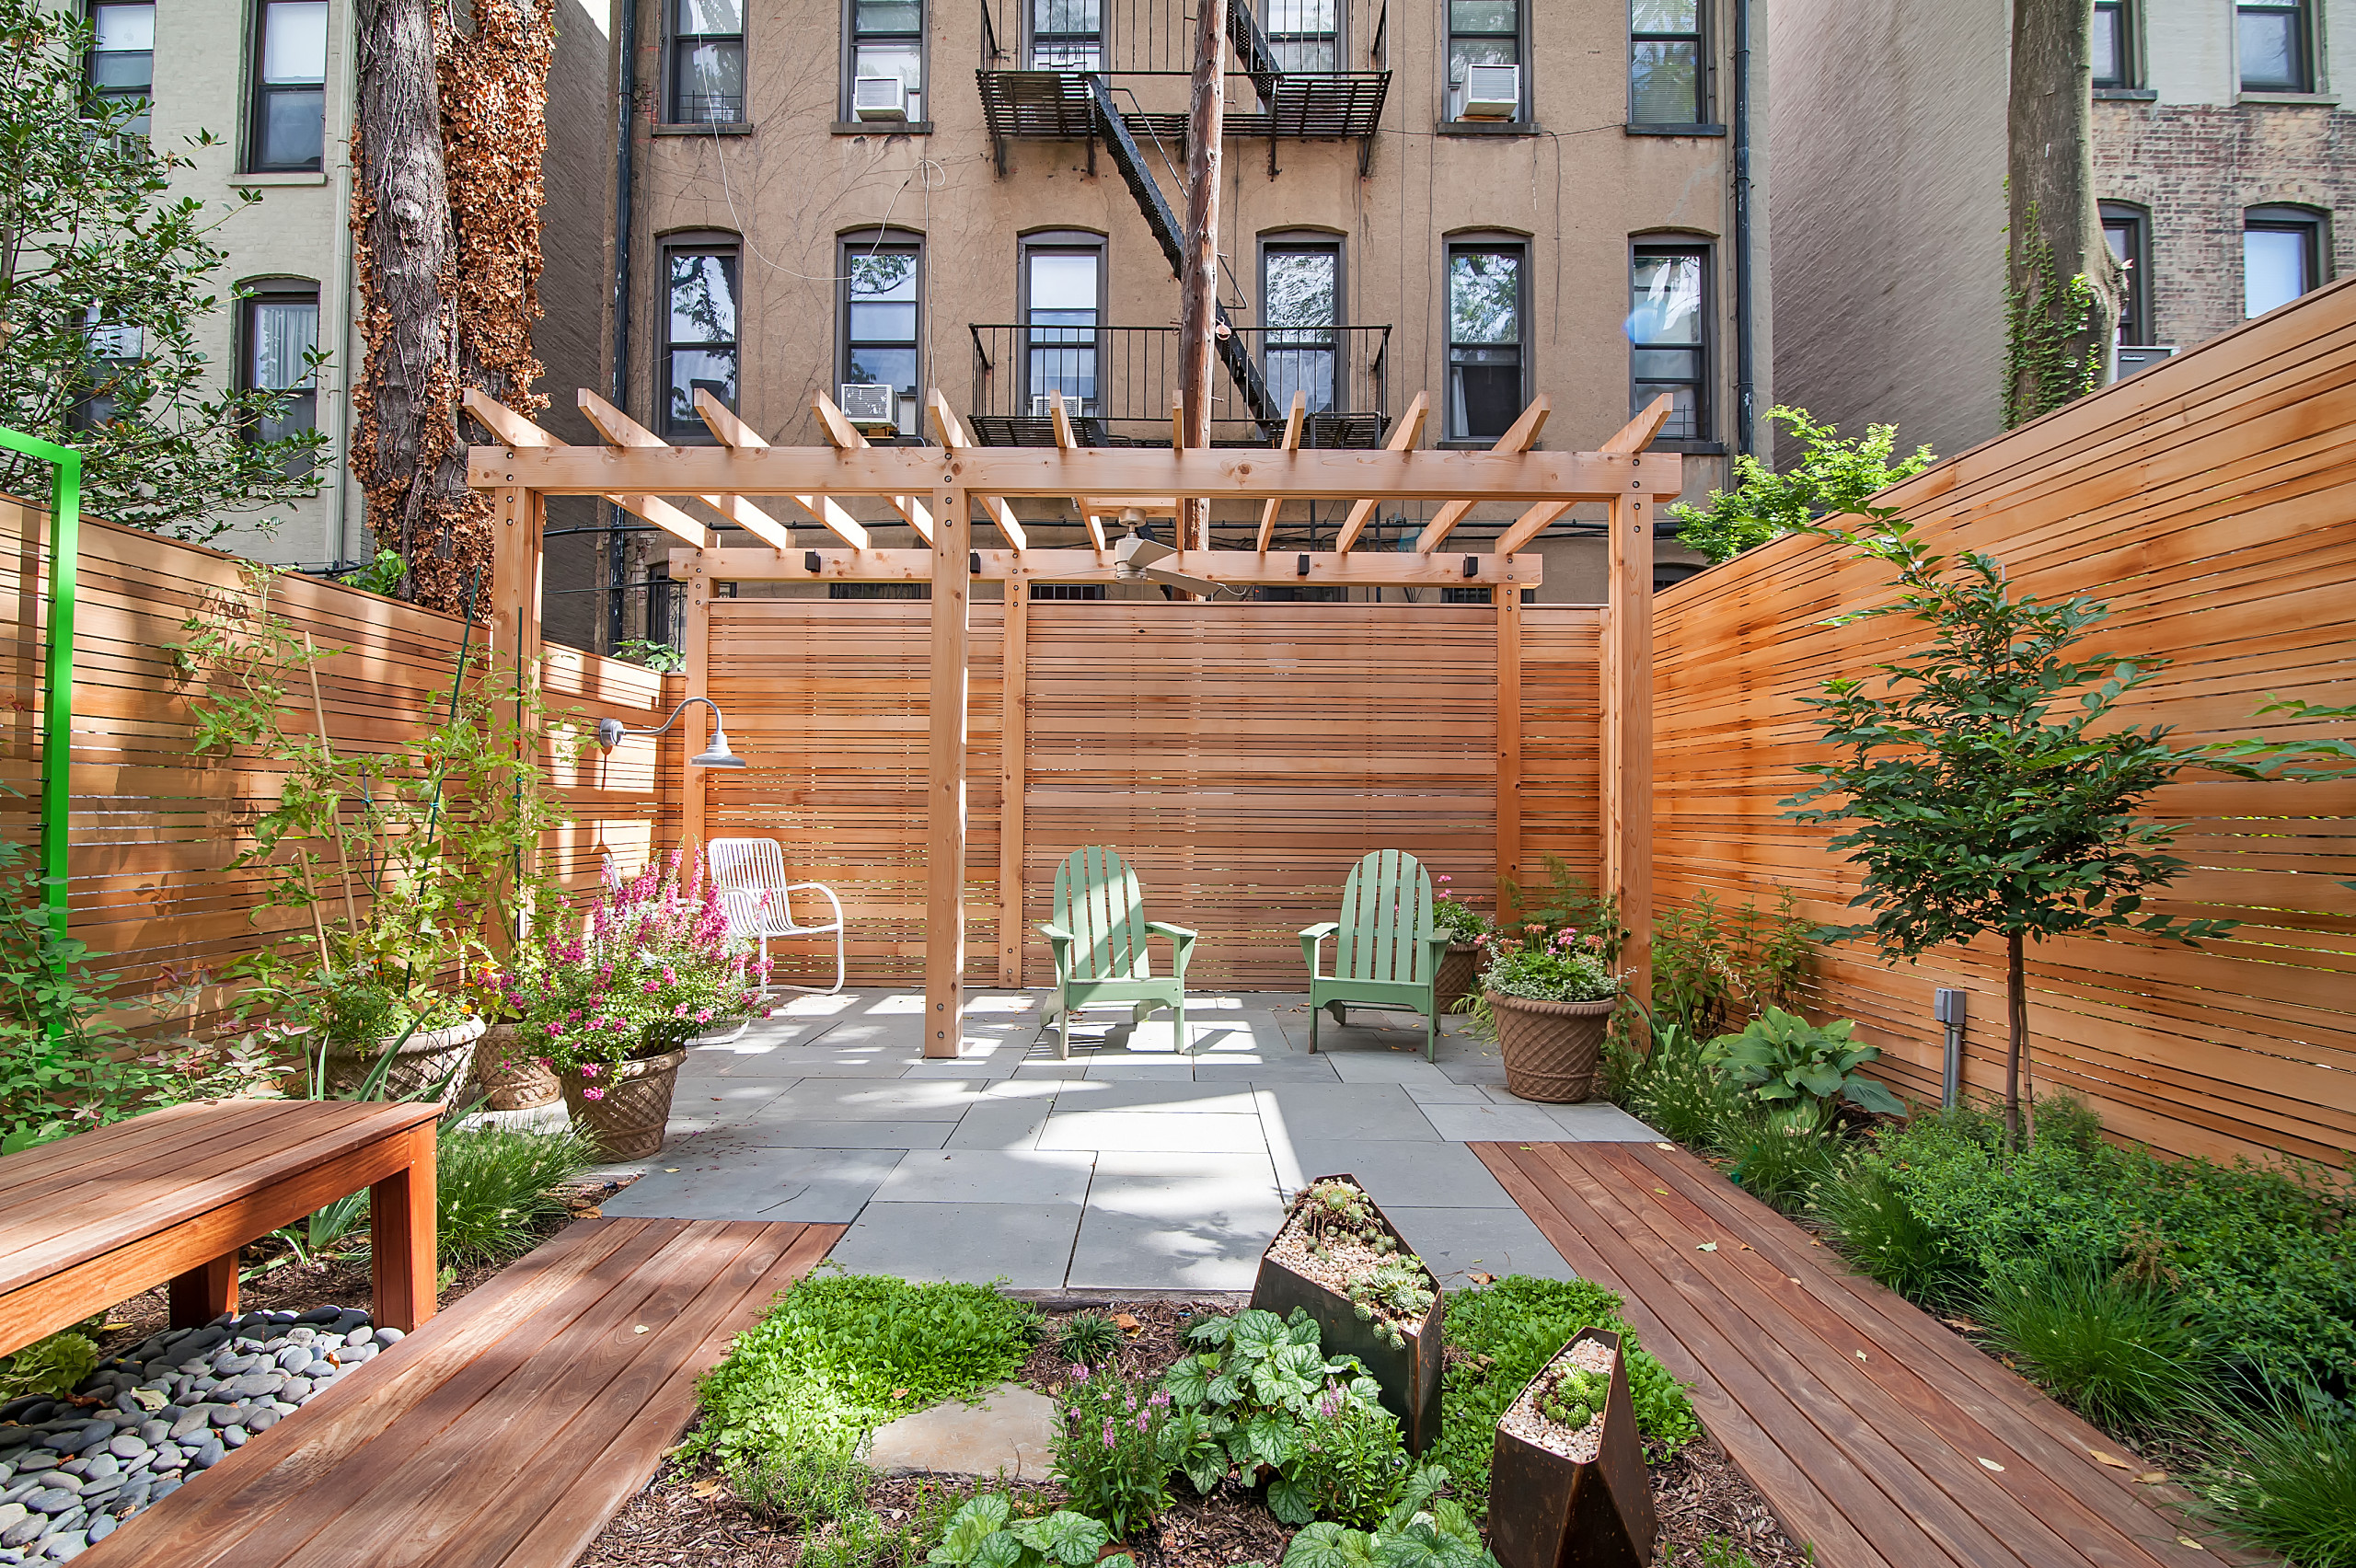 75 Patio with a Pergola Ideas You'll Love - July, 2023 | Houzz